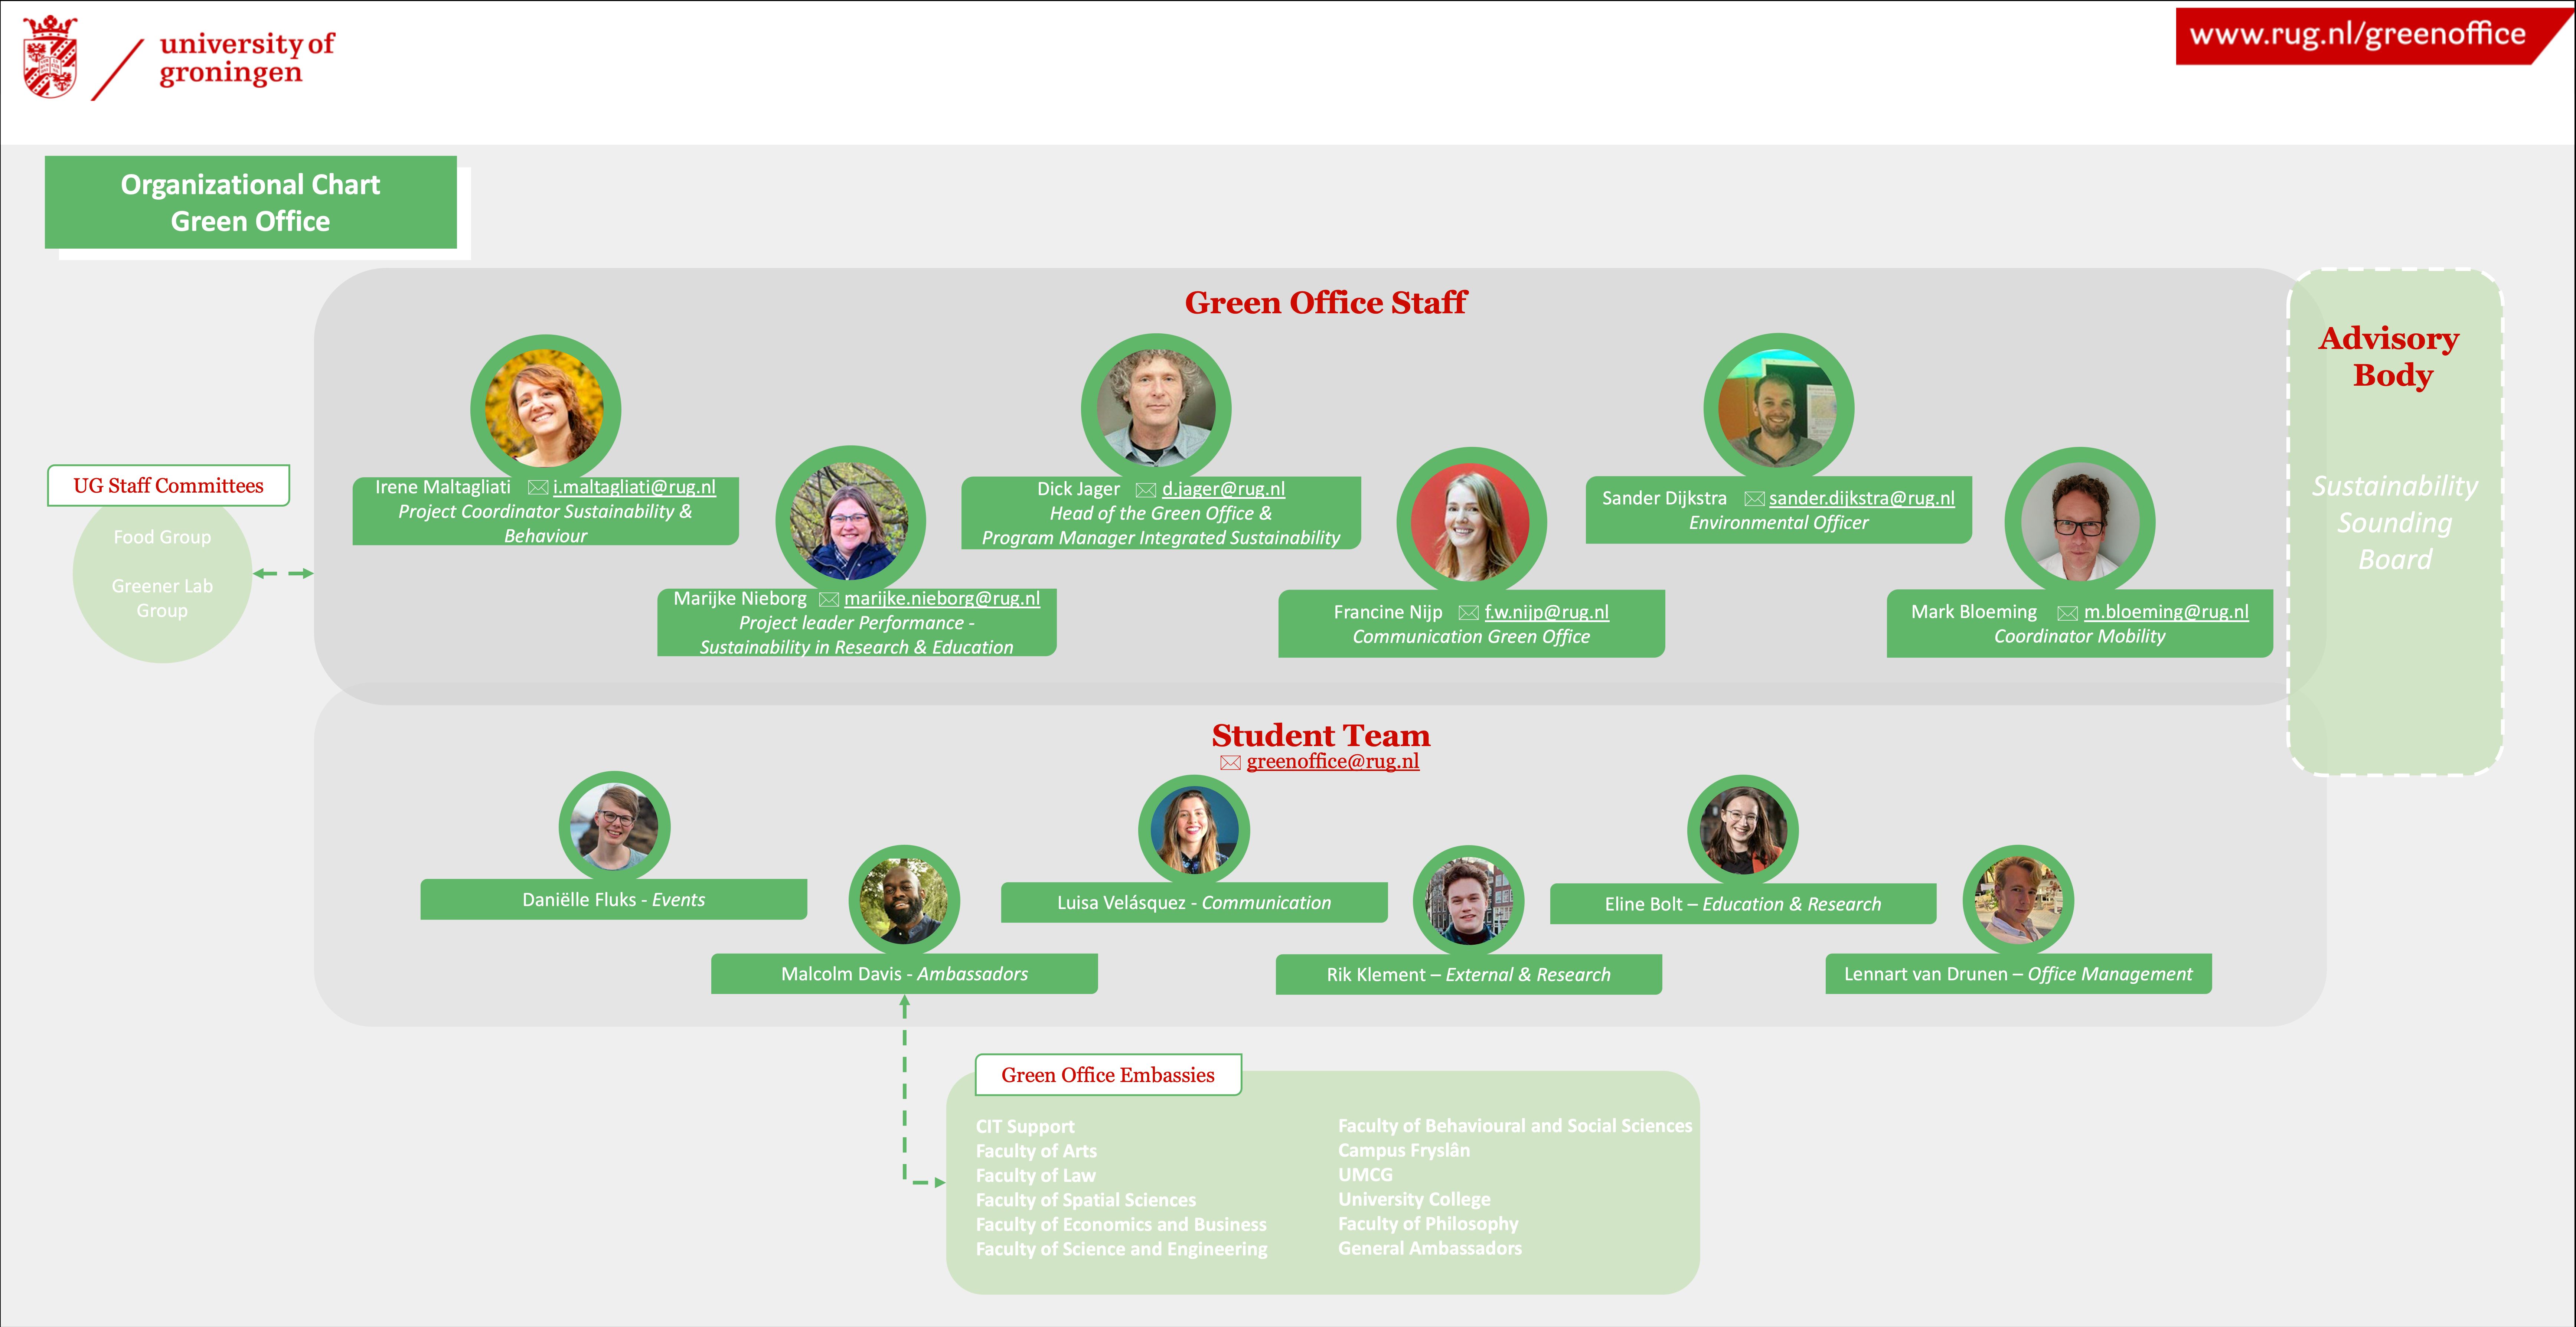 Organization chart of the Green Office